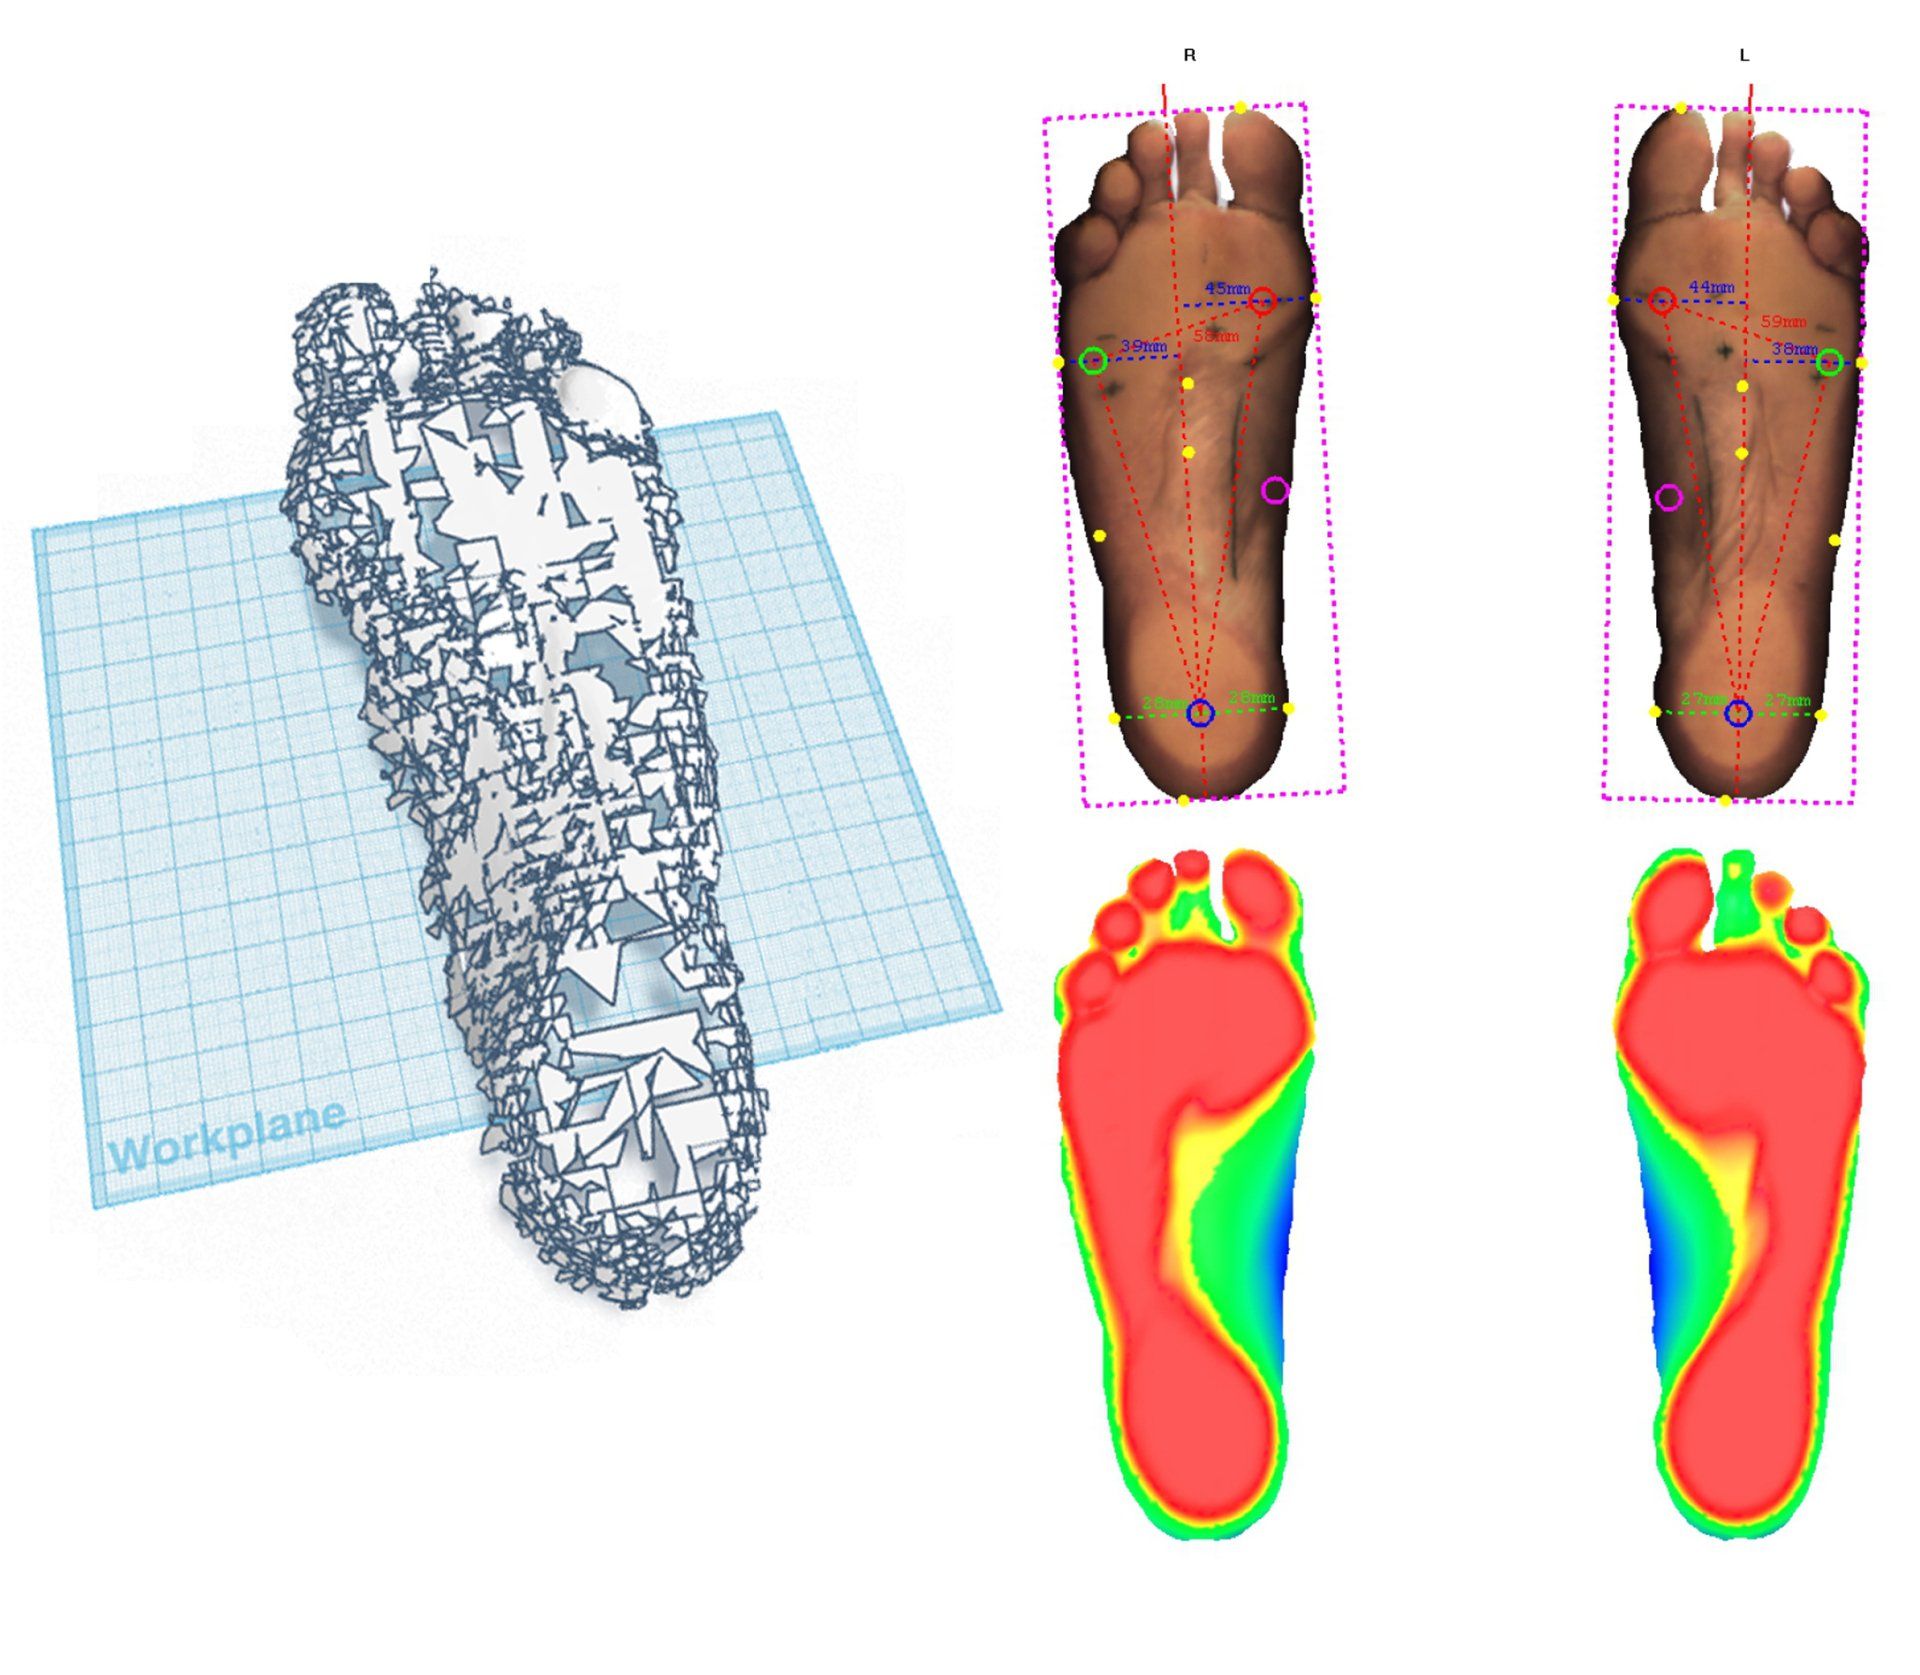 3-dimensional images of the feet